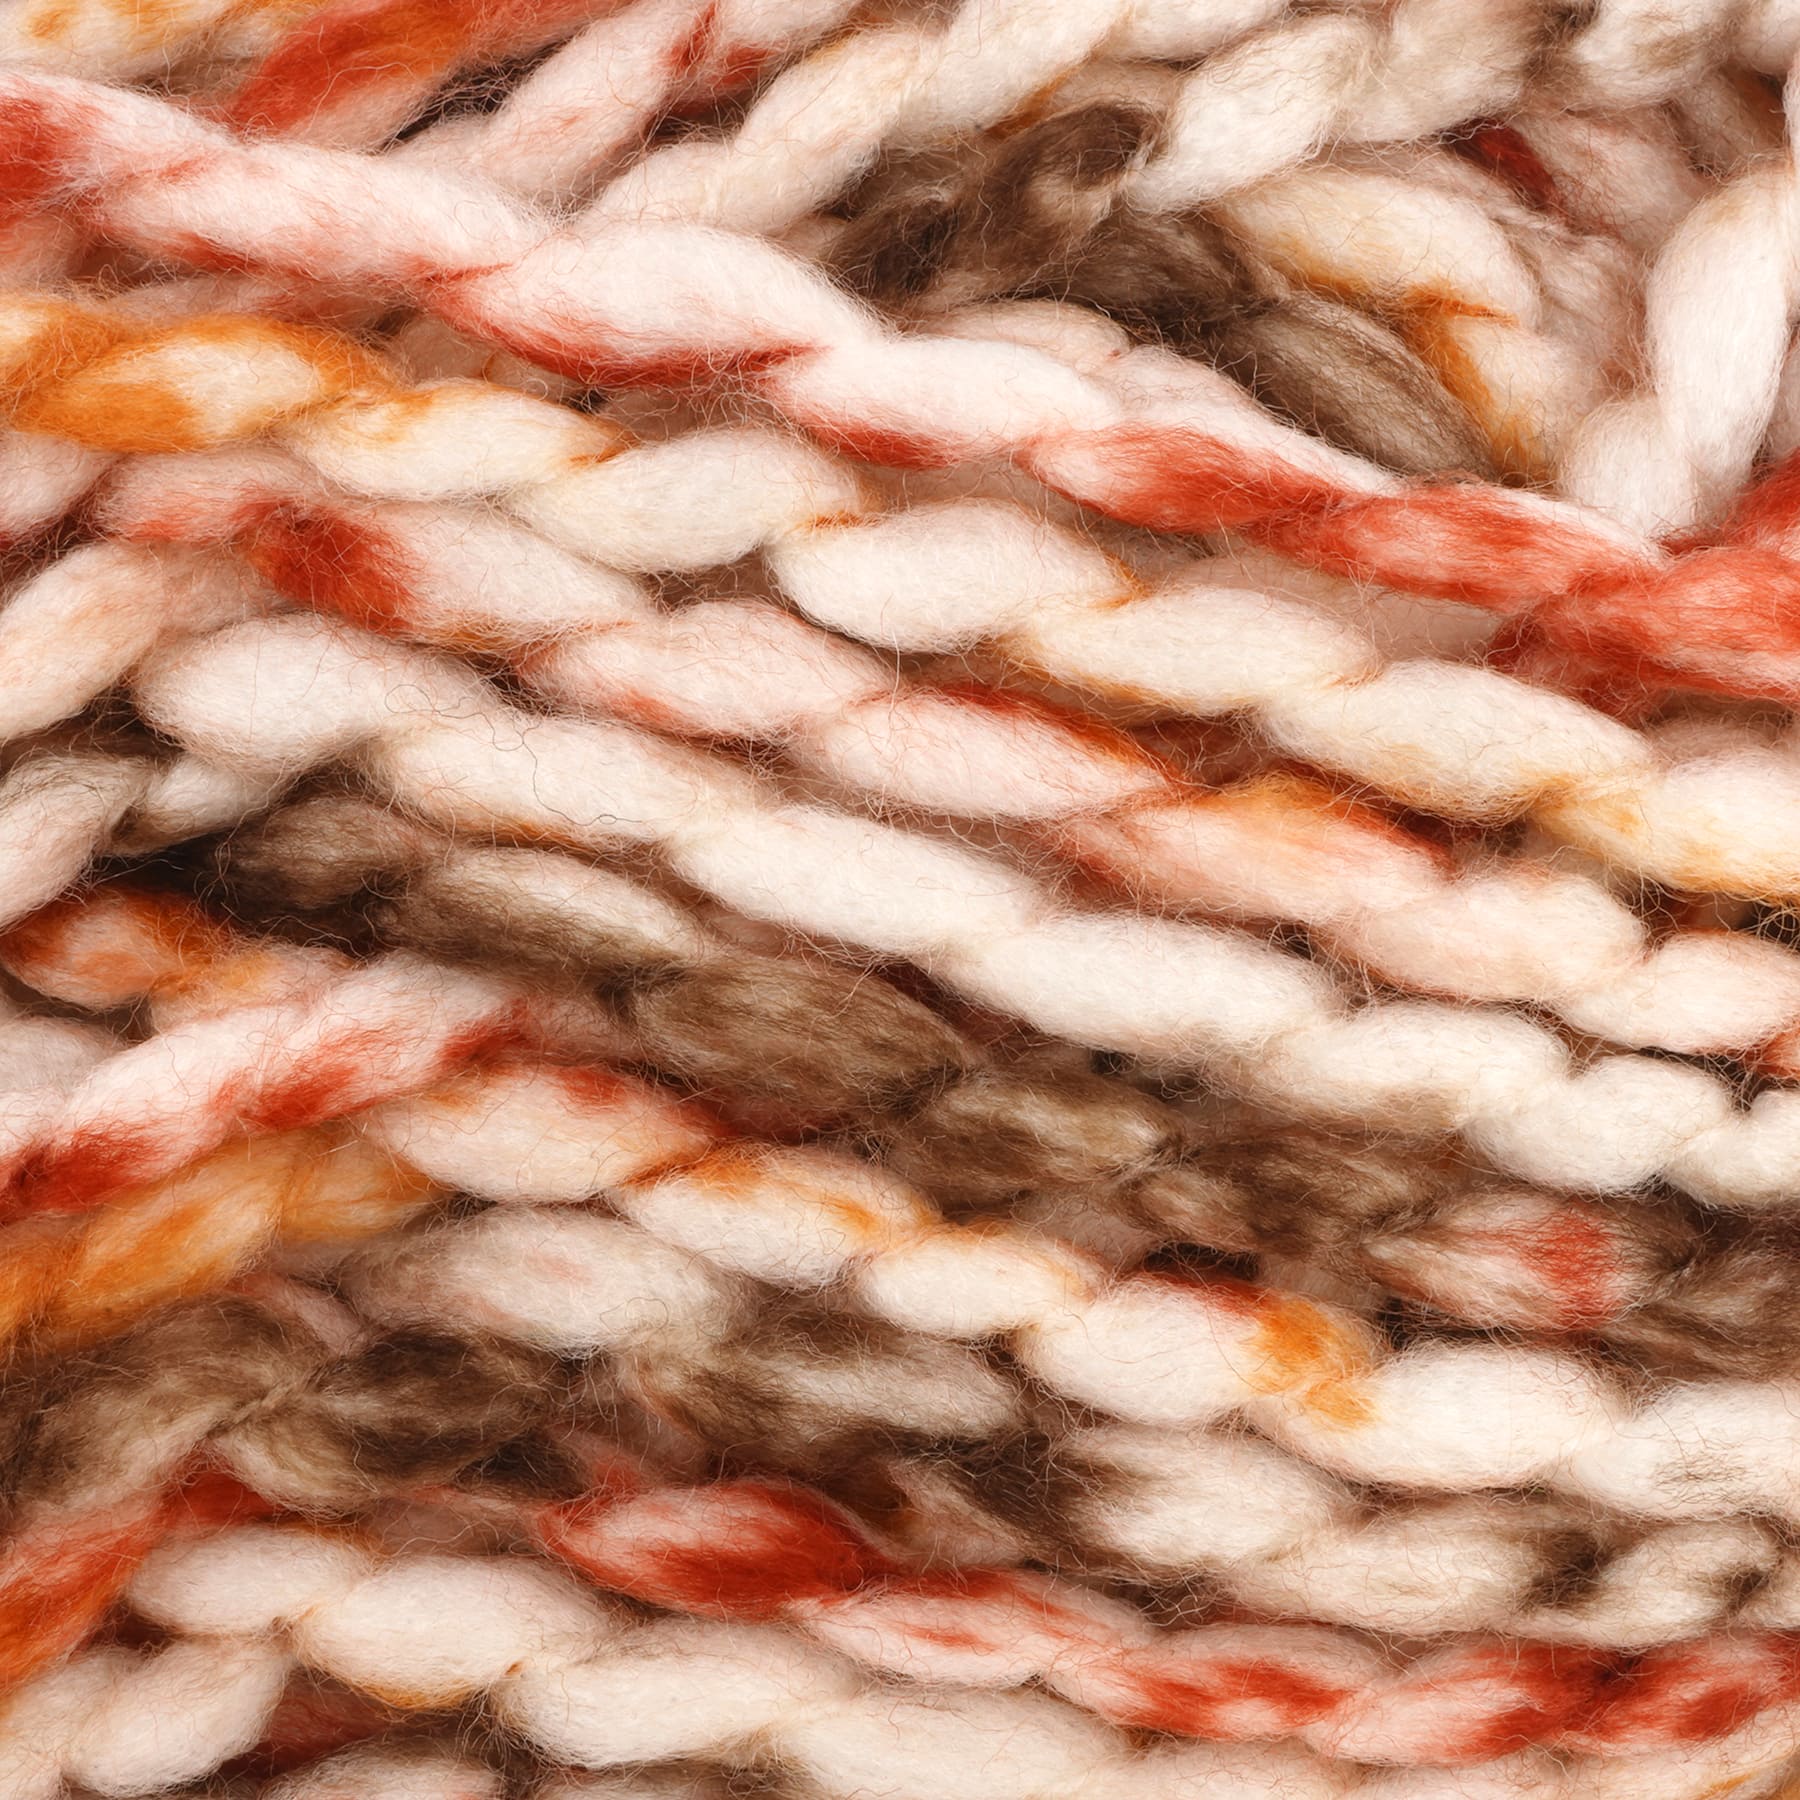 Twisted Tones™ Yarn by Loops & Threads®